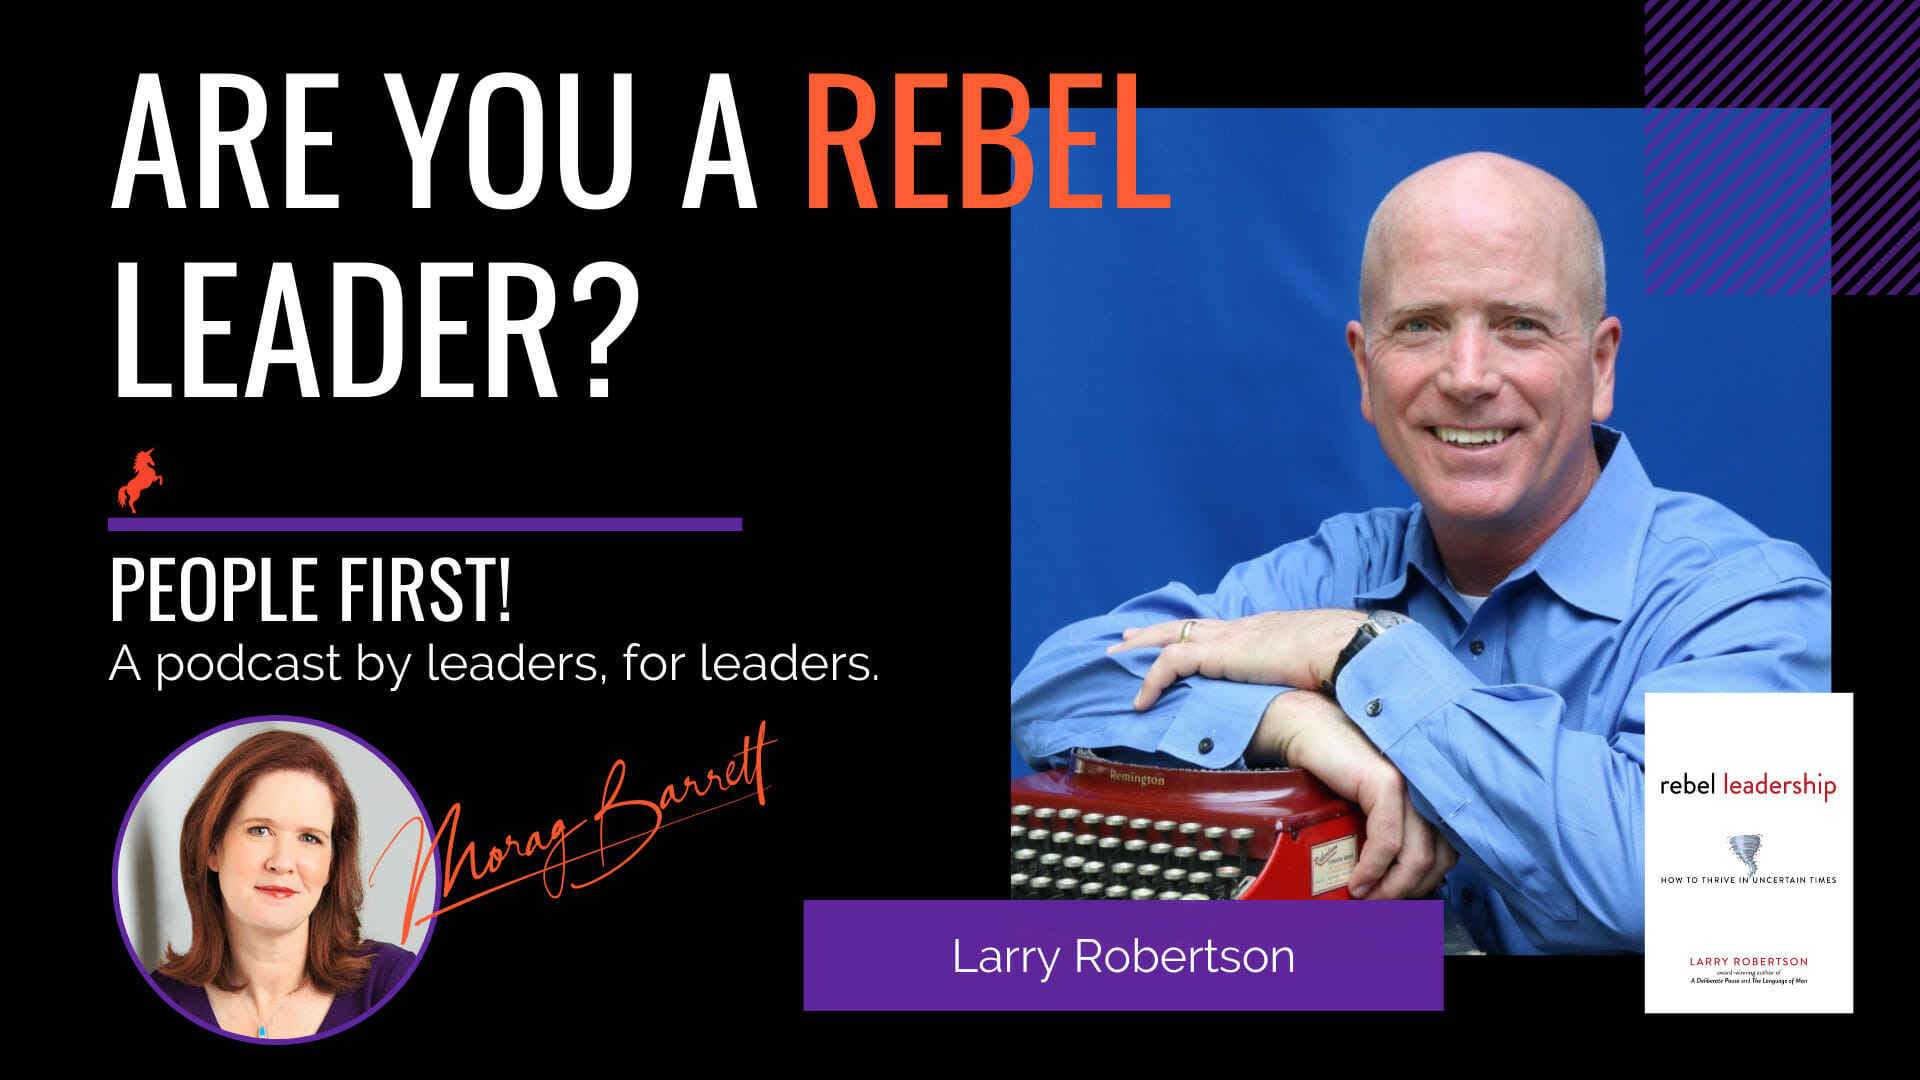 Are You a Rebel Leader? Morag Barrett and Larry Robertson